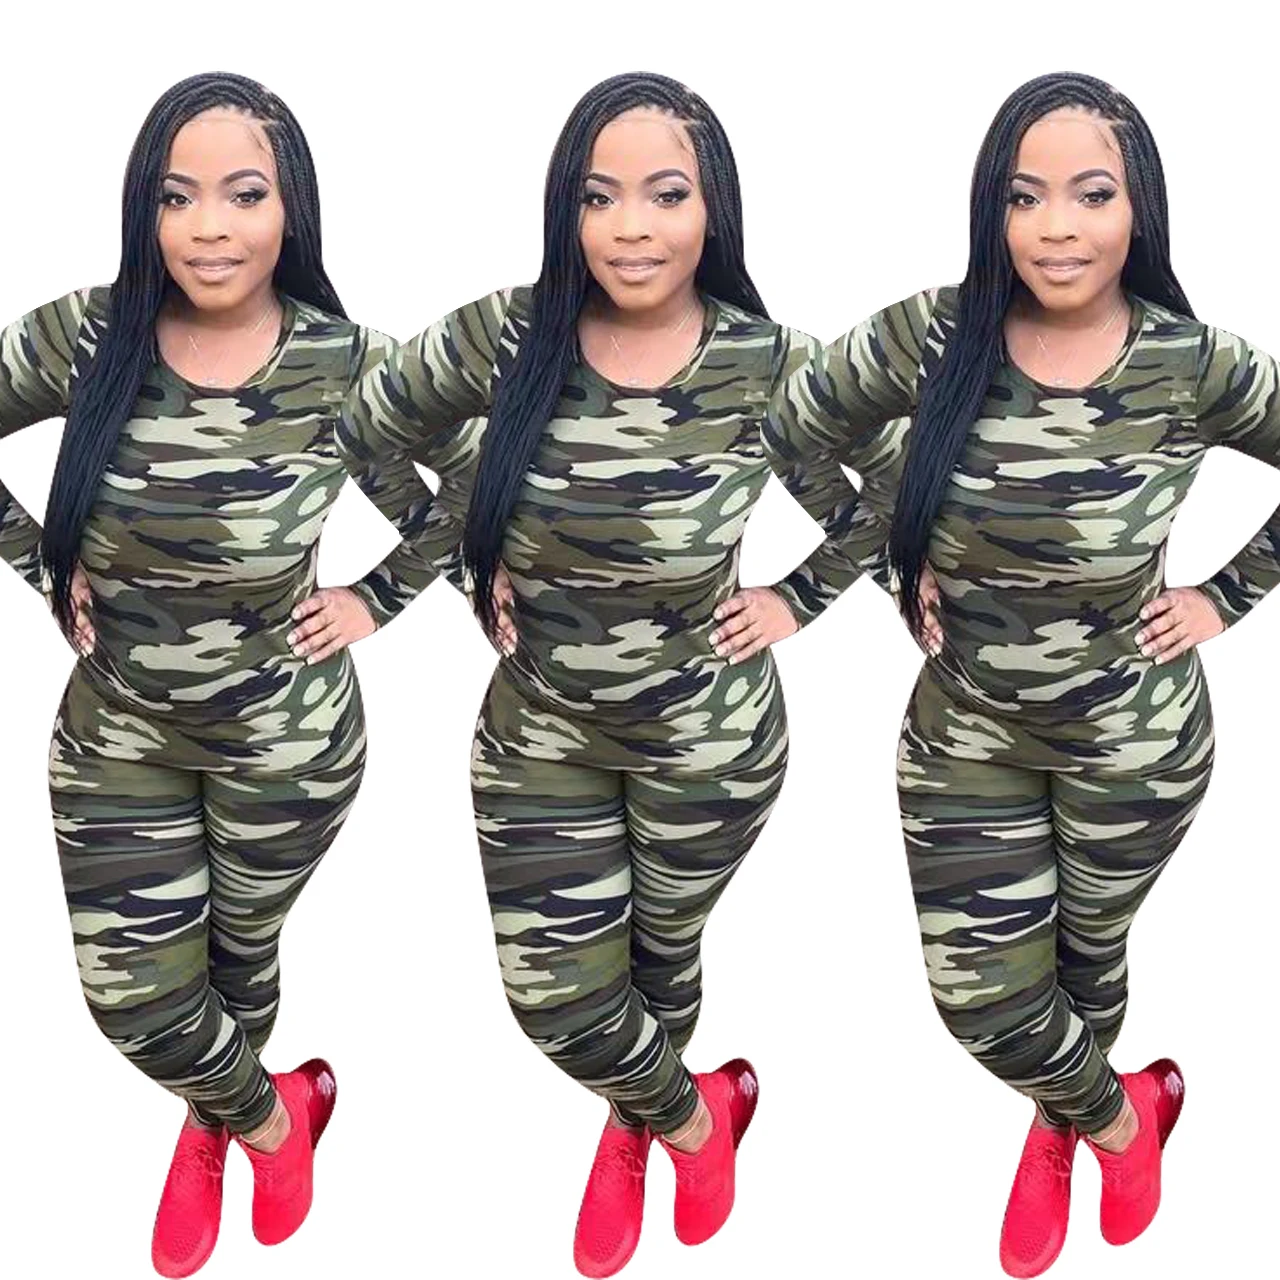 

Foma clothing YD8354 hot selling camouflage women's autumn and winter sports leisure Women's clothing two piece set 2021, As pictures